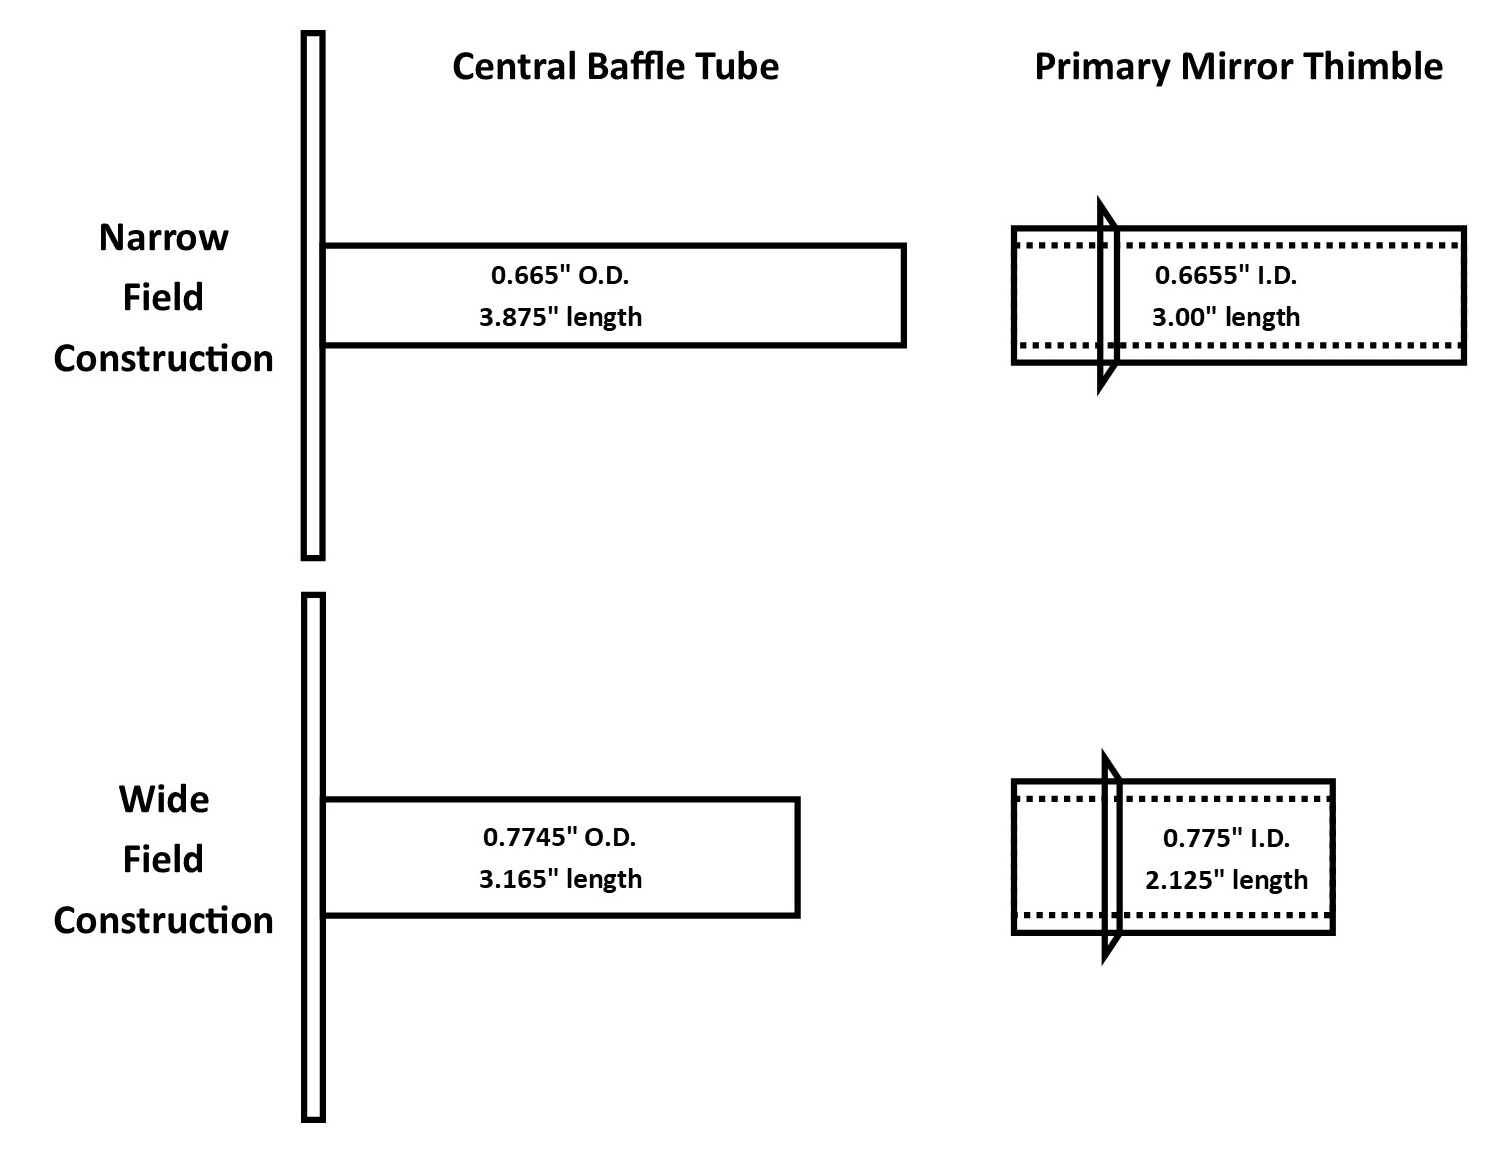 Dimensions of the central baffle tube and primary mirror thimble